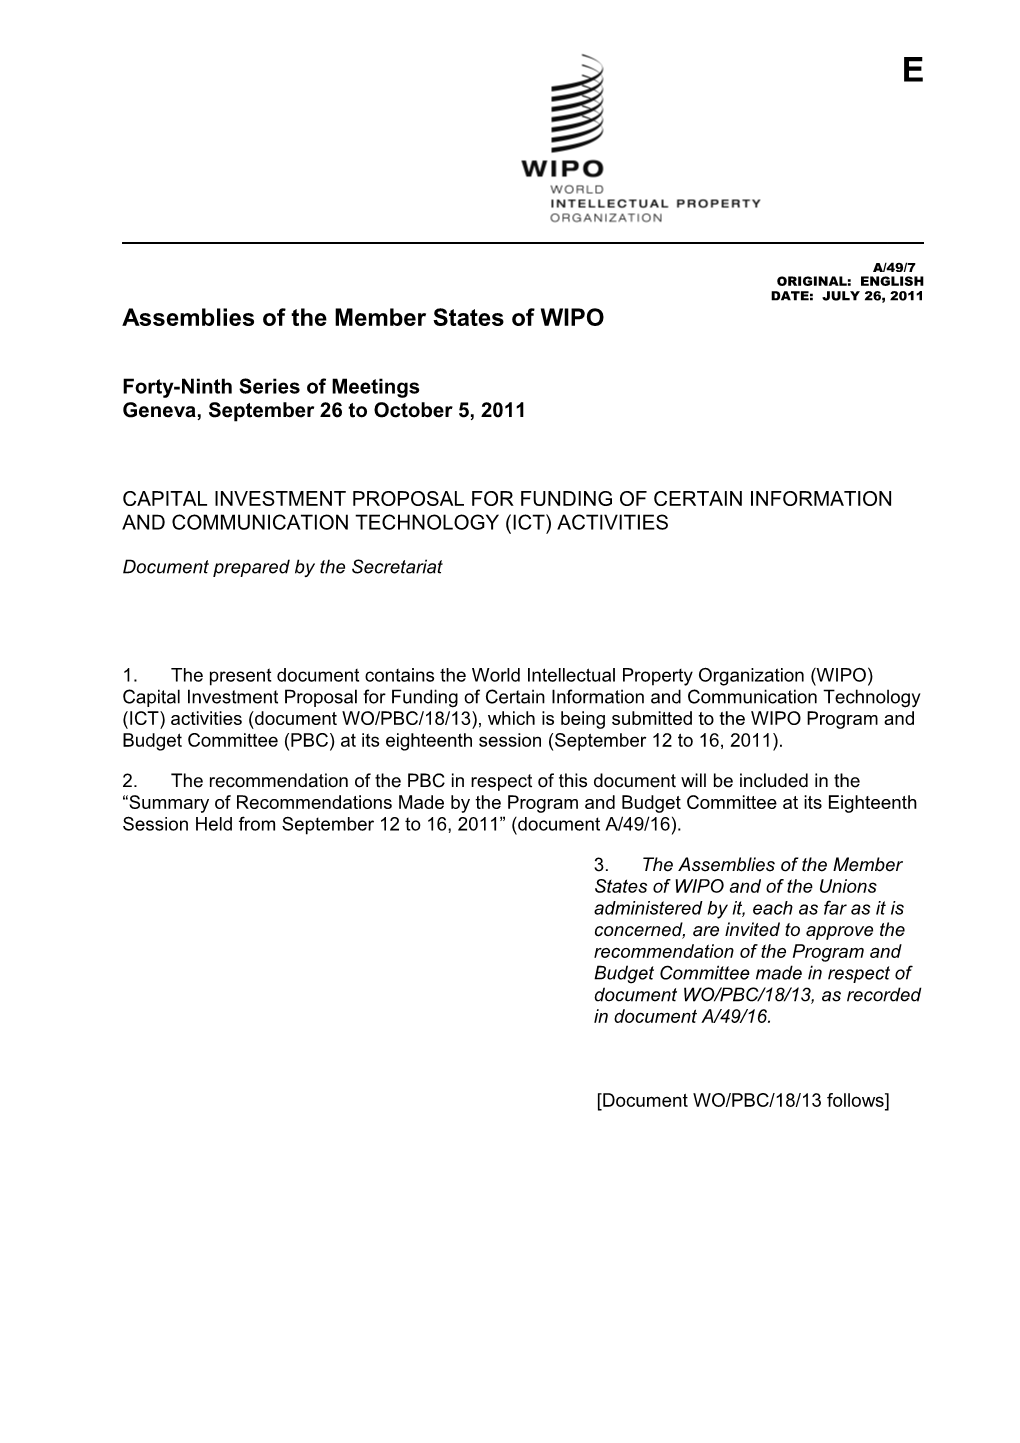 Assemblies of the Member States of WIPO s7